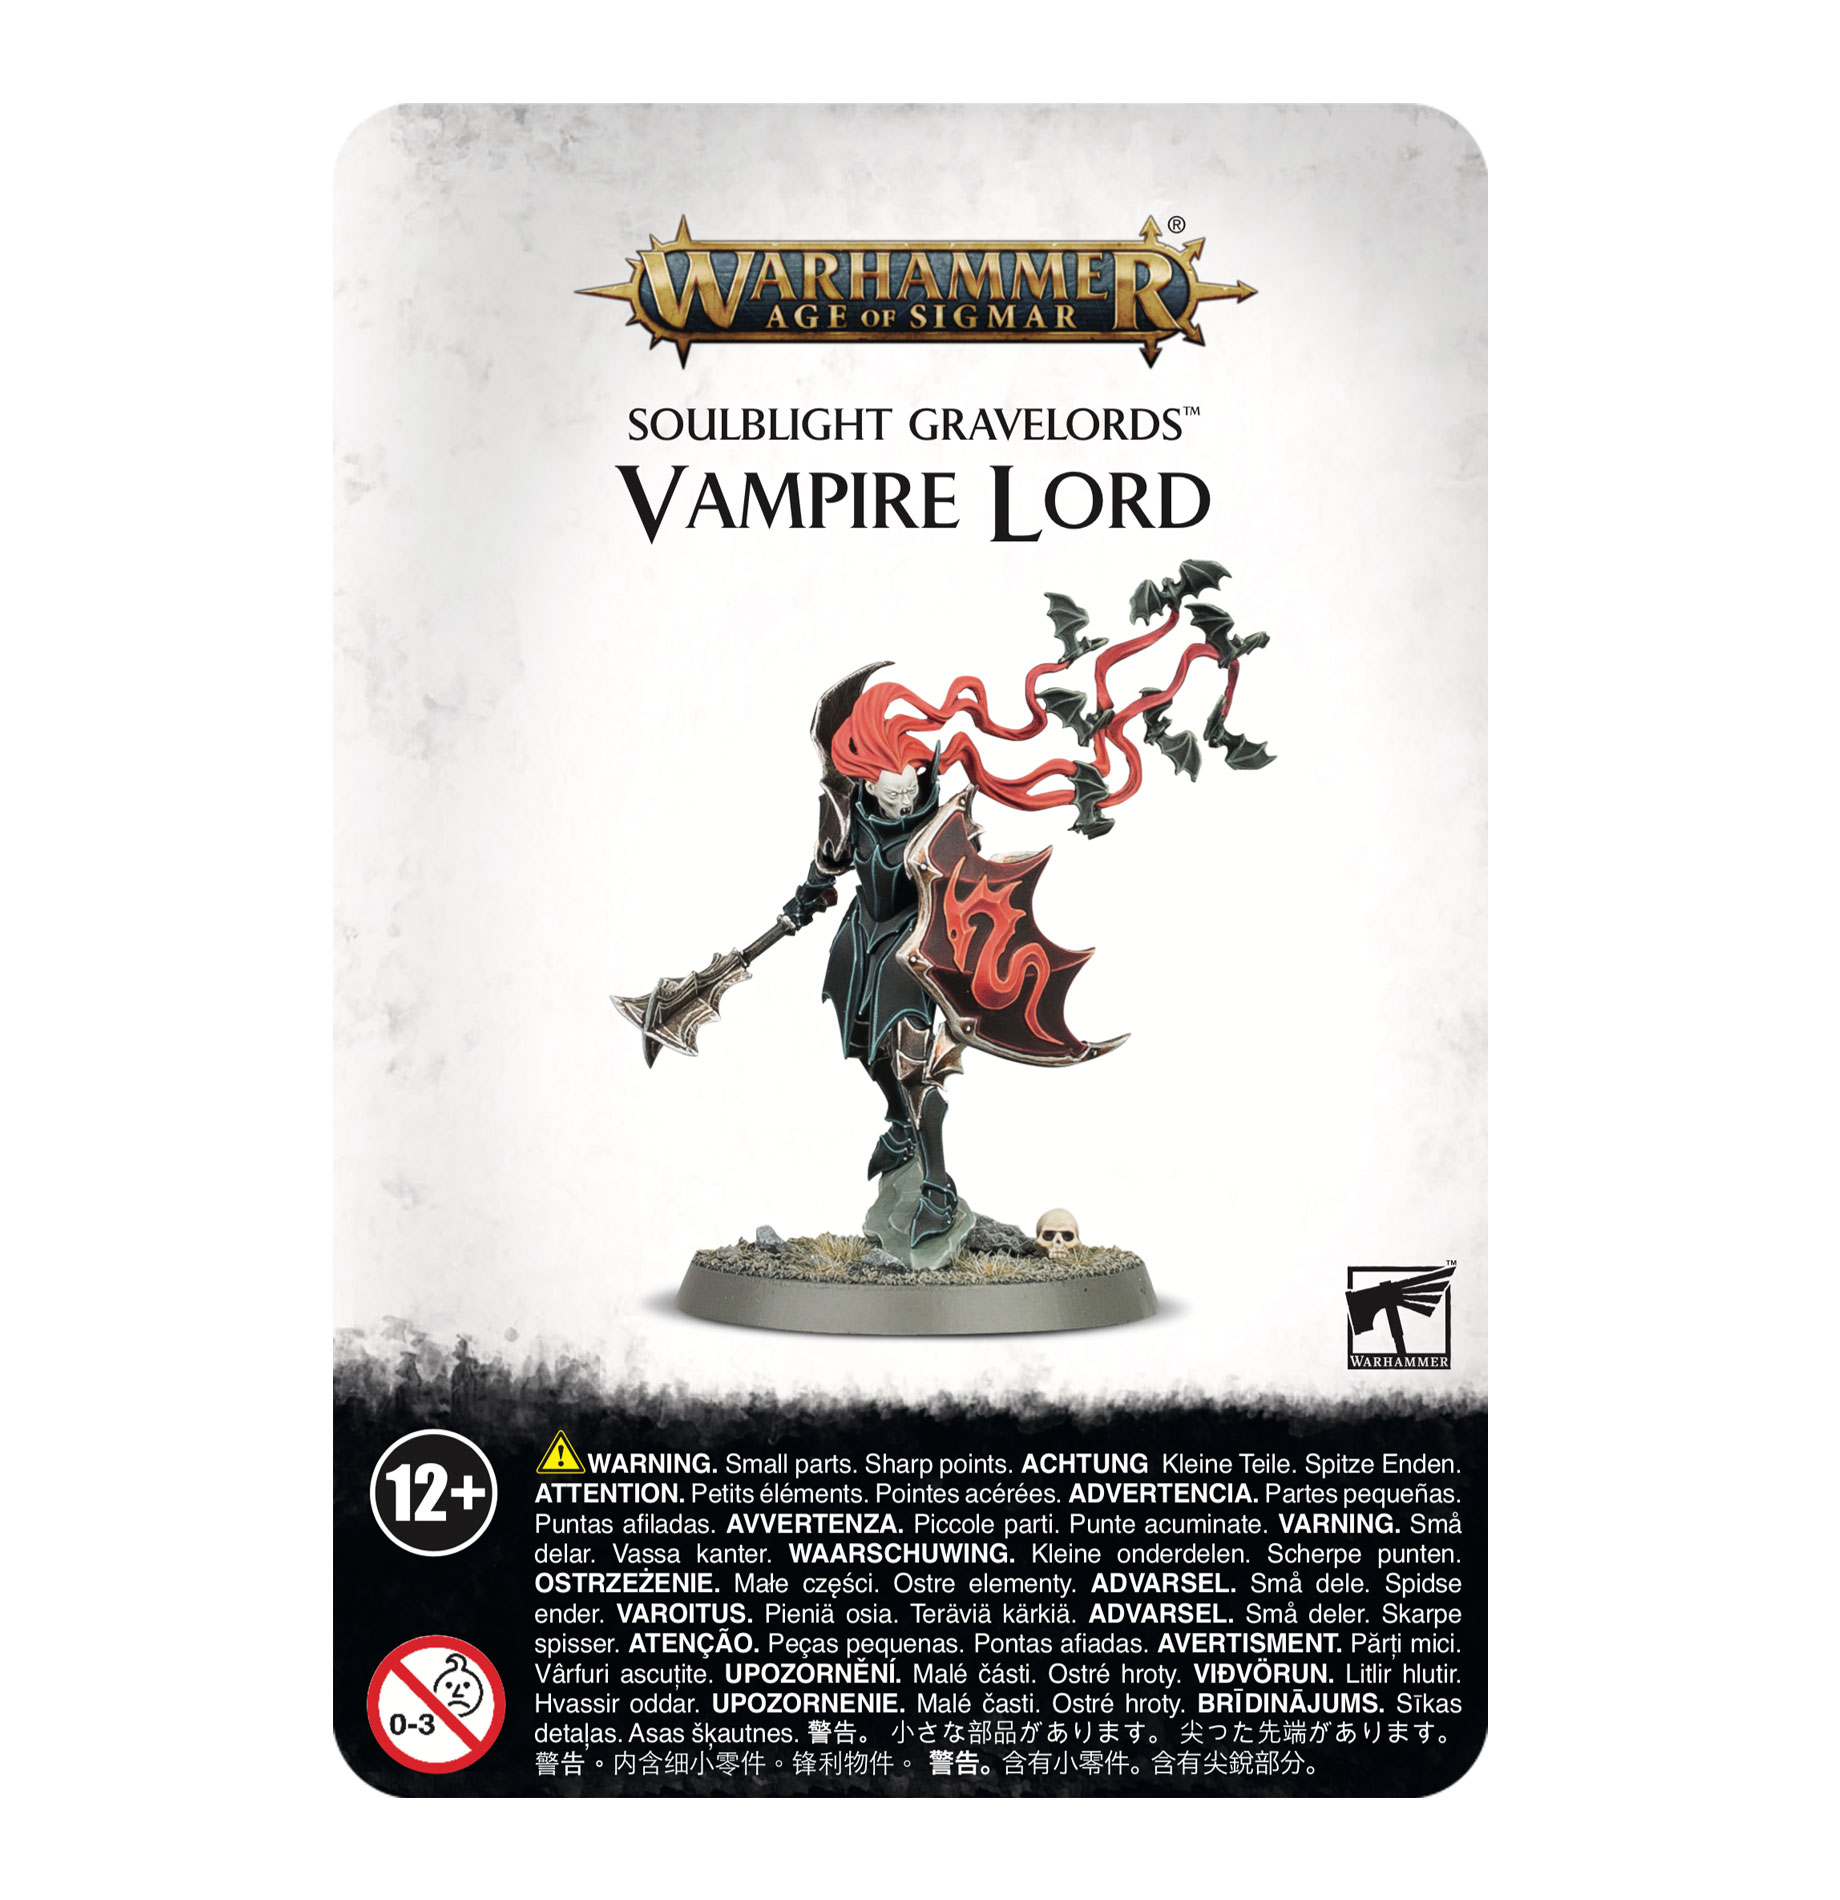 Vampire Lord - 91-52 - Soulblight Gravelords - Warhammer Age of Sigmar